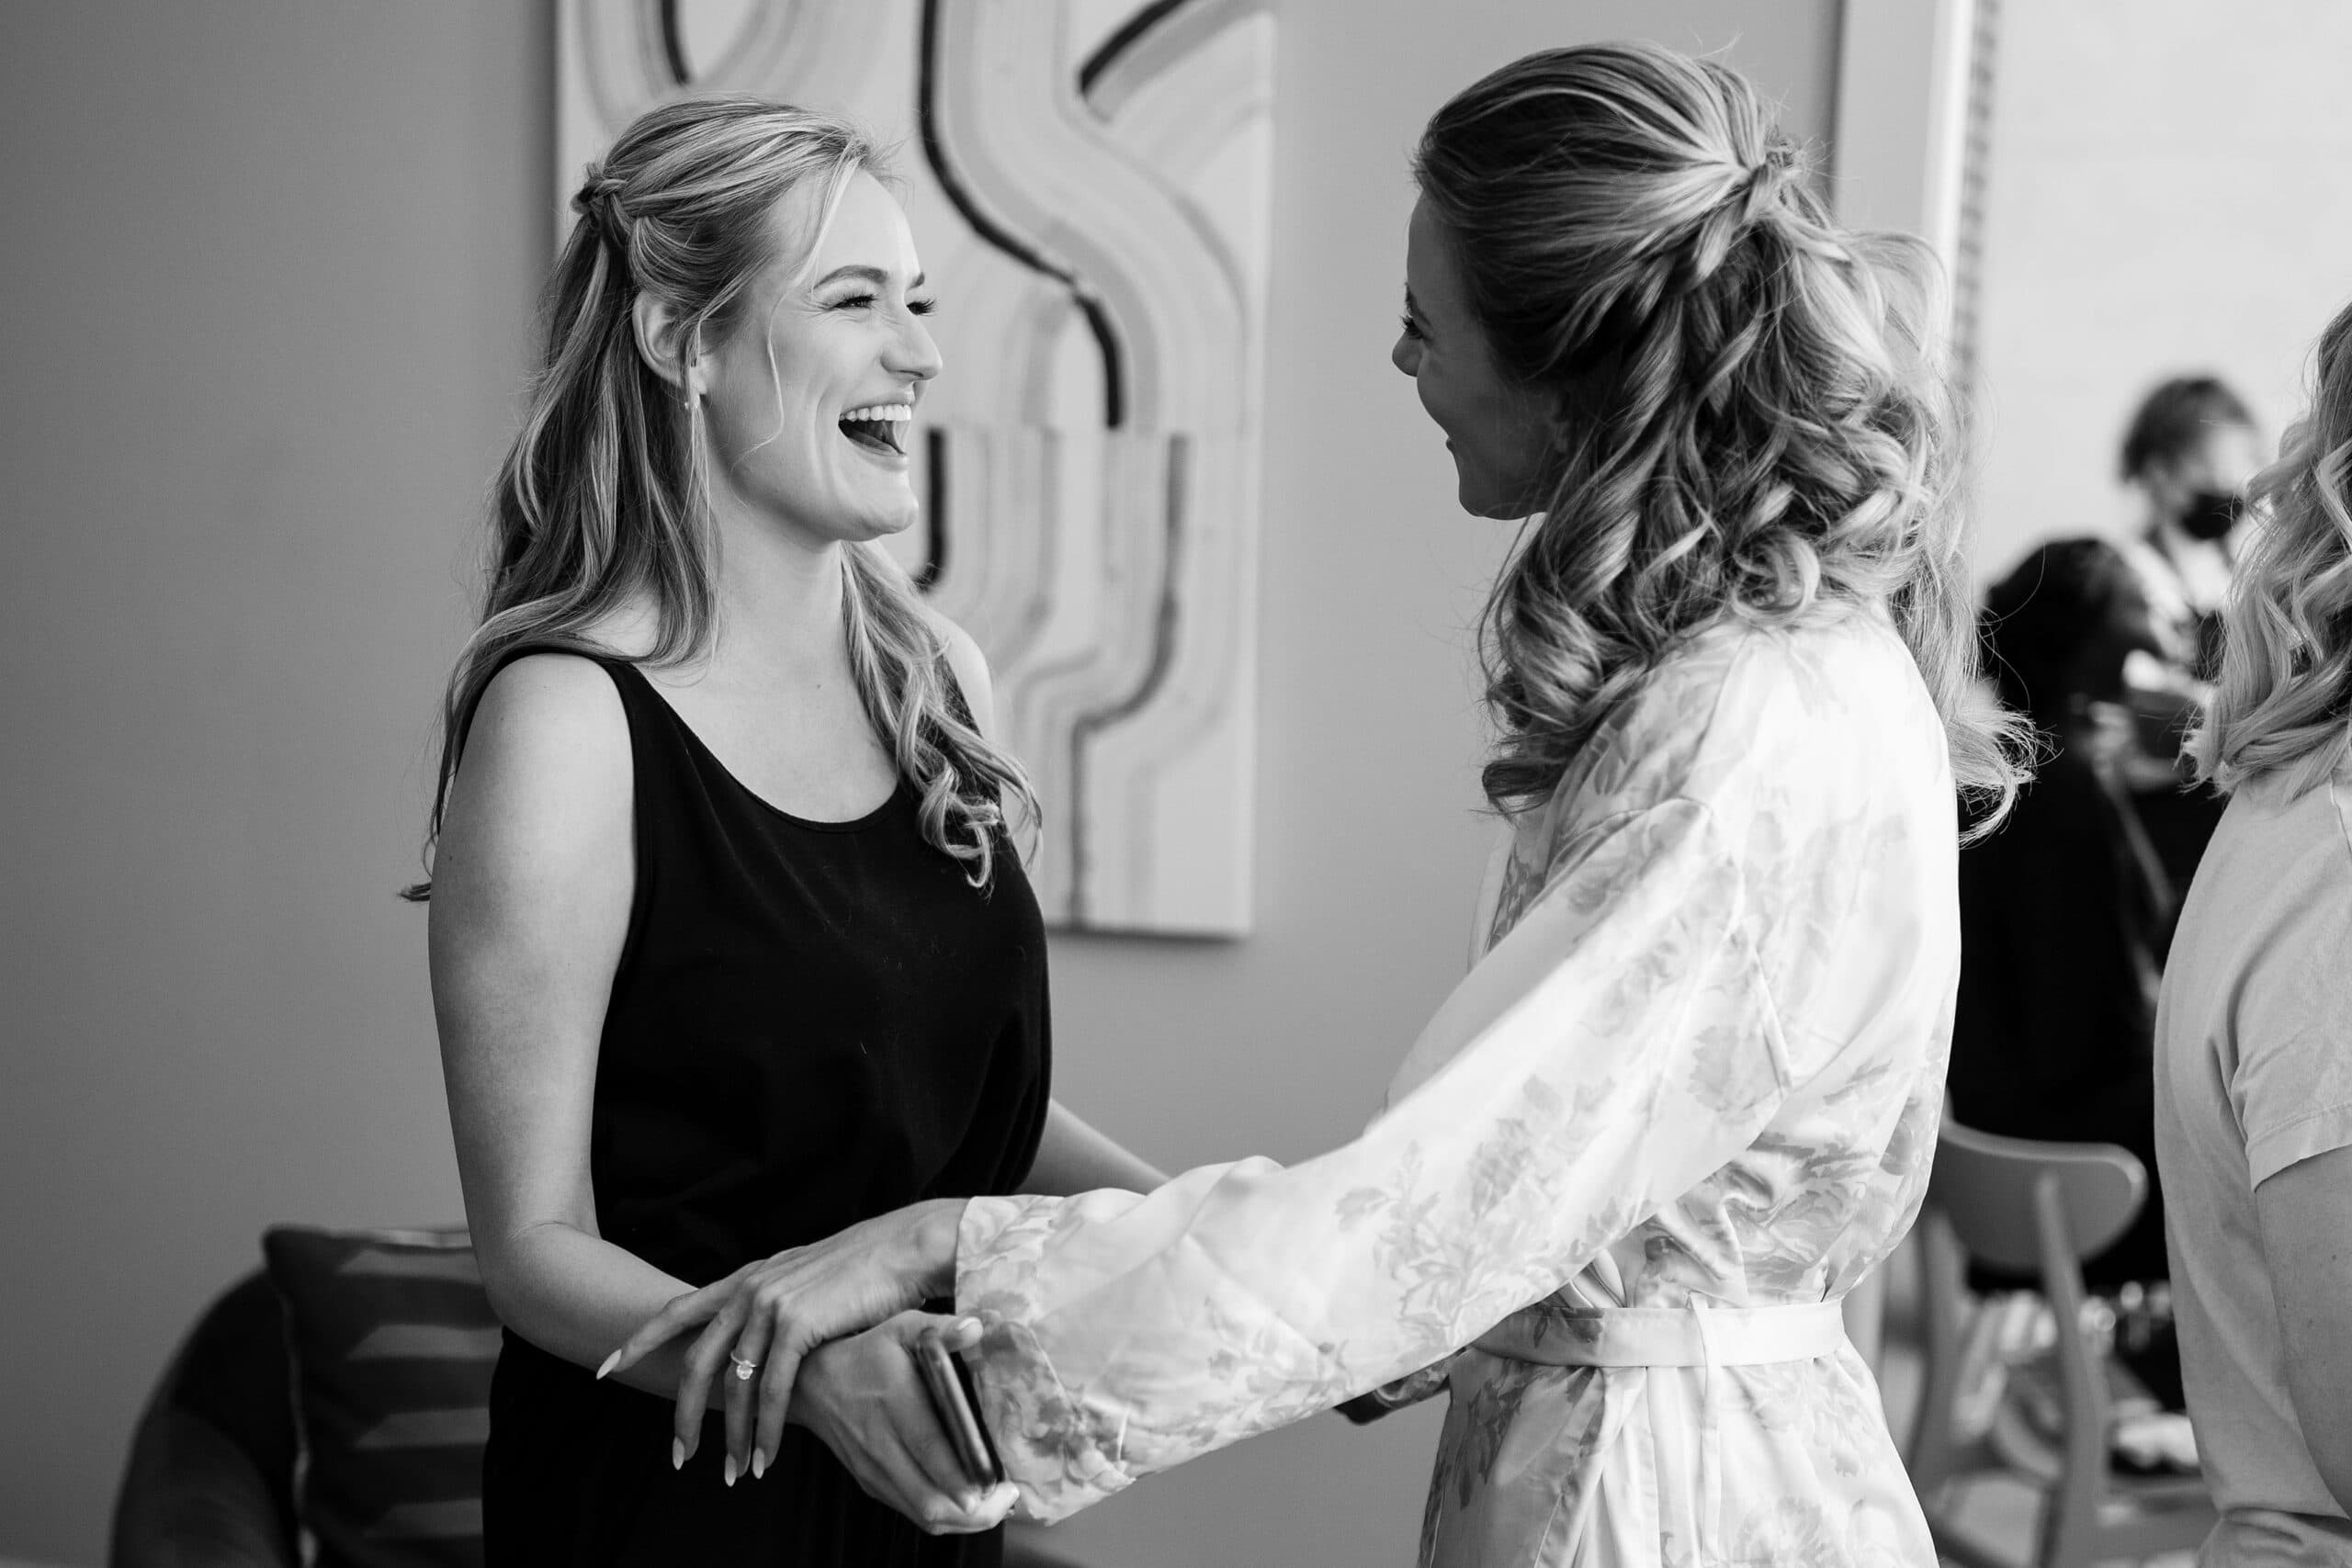 The bride laughs with a bridesmaid